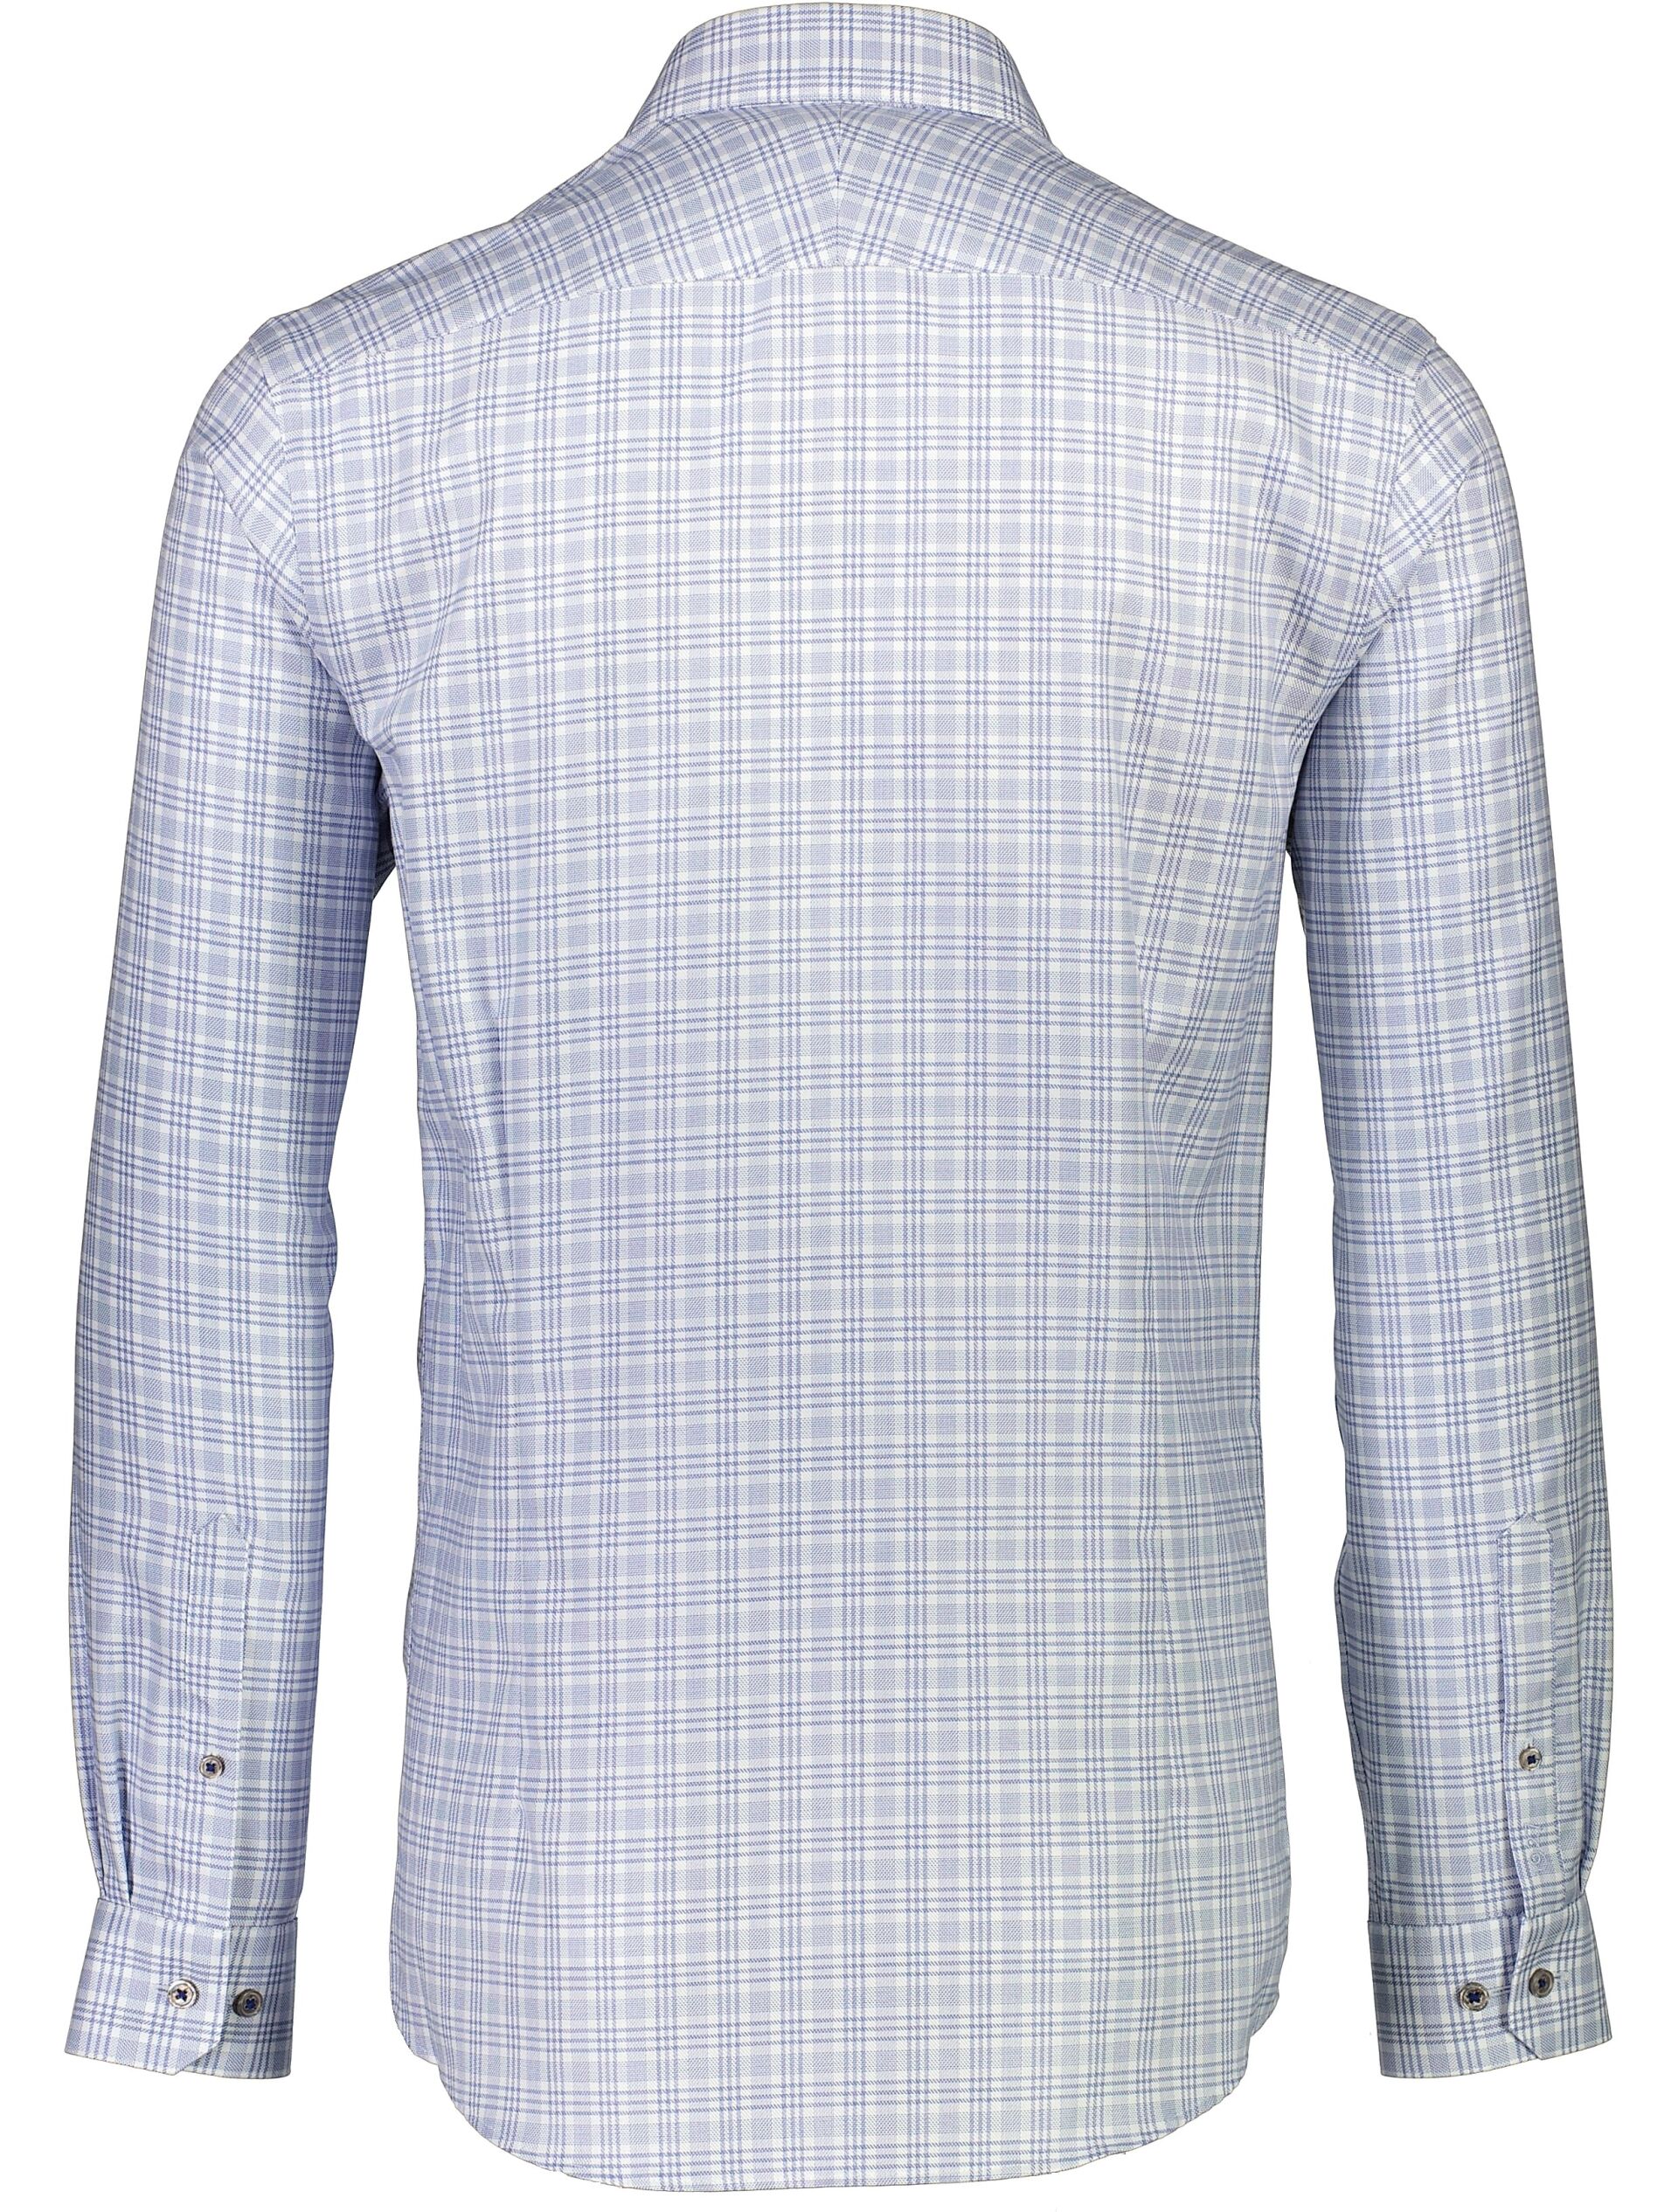 1927 Business casual shirt 30-247266S